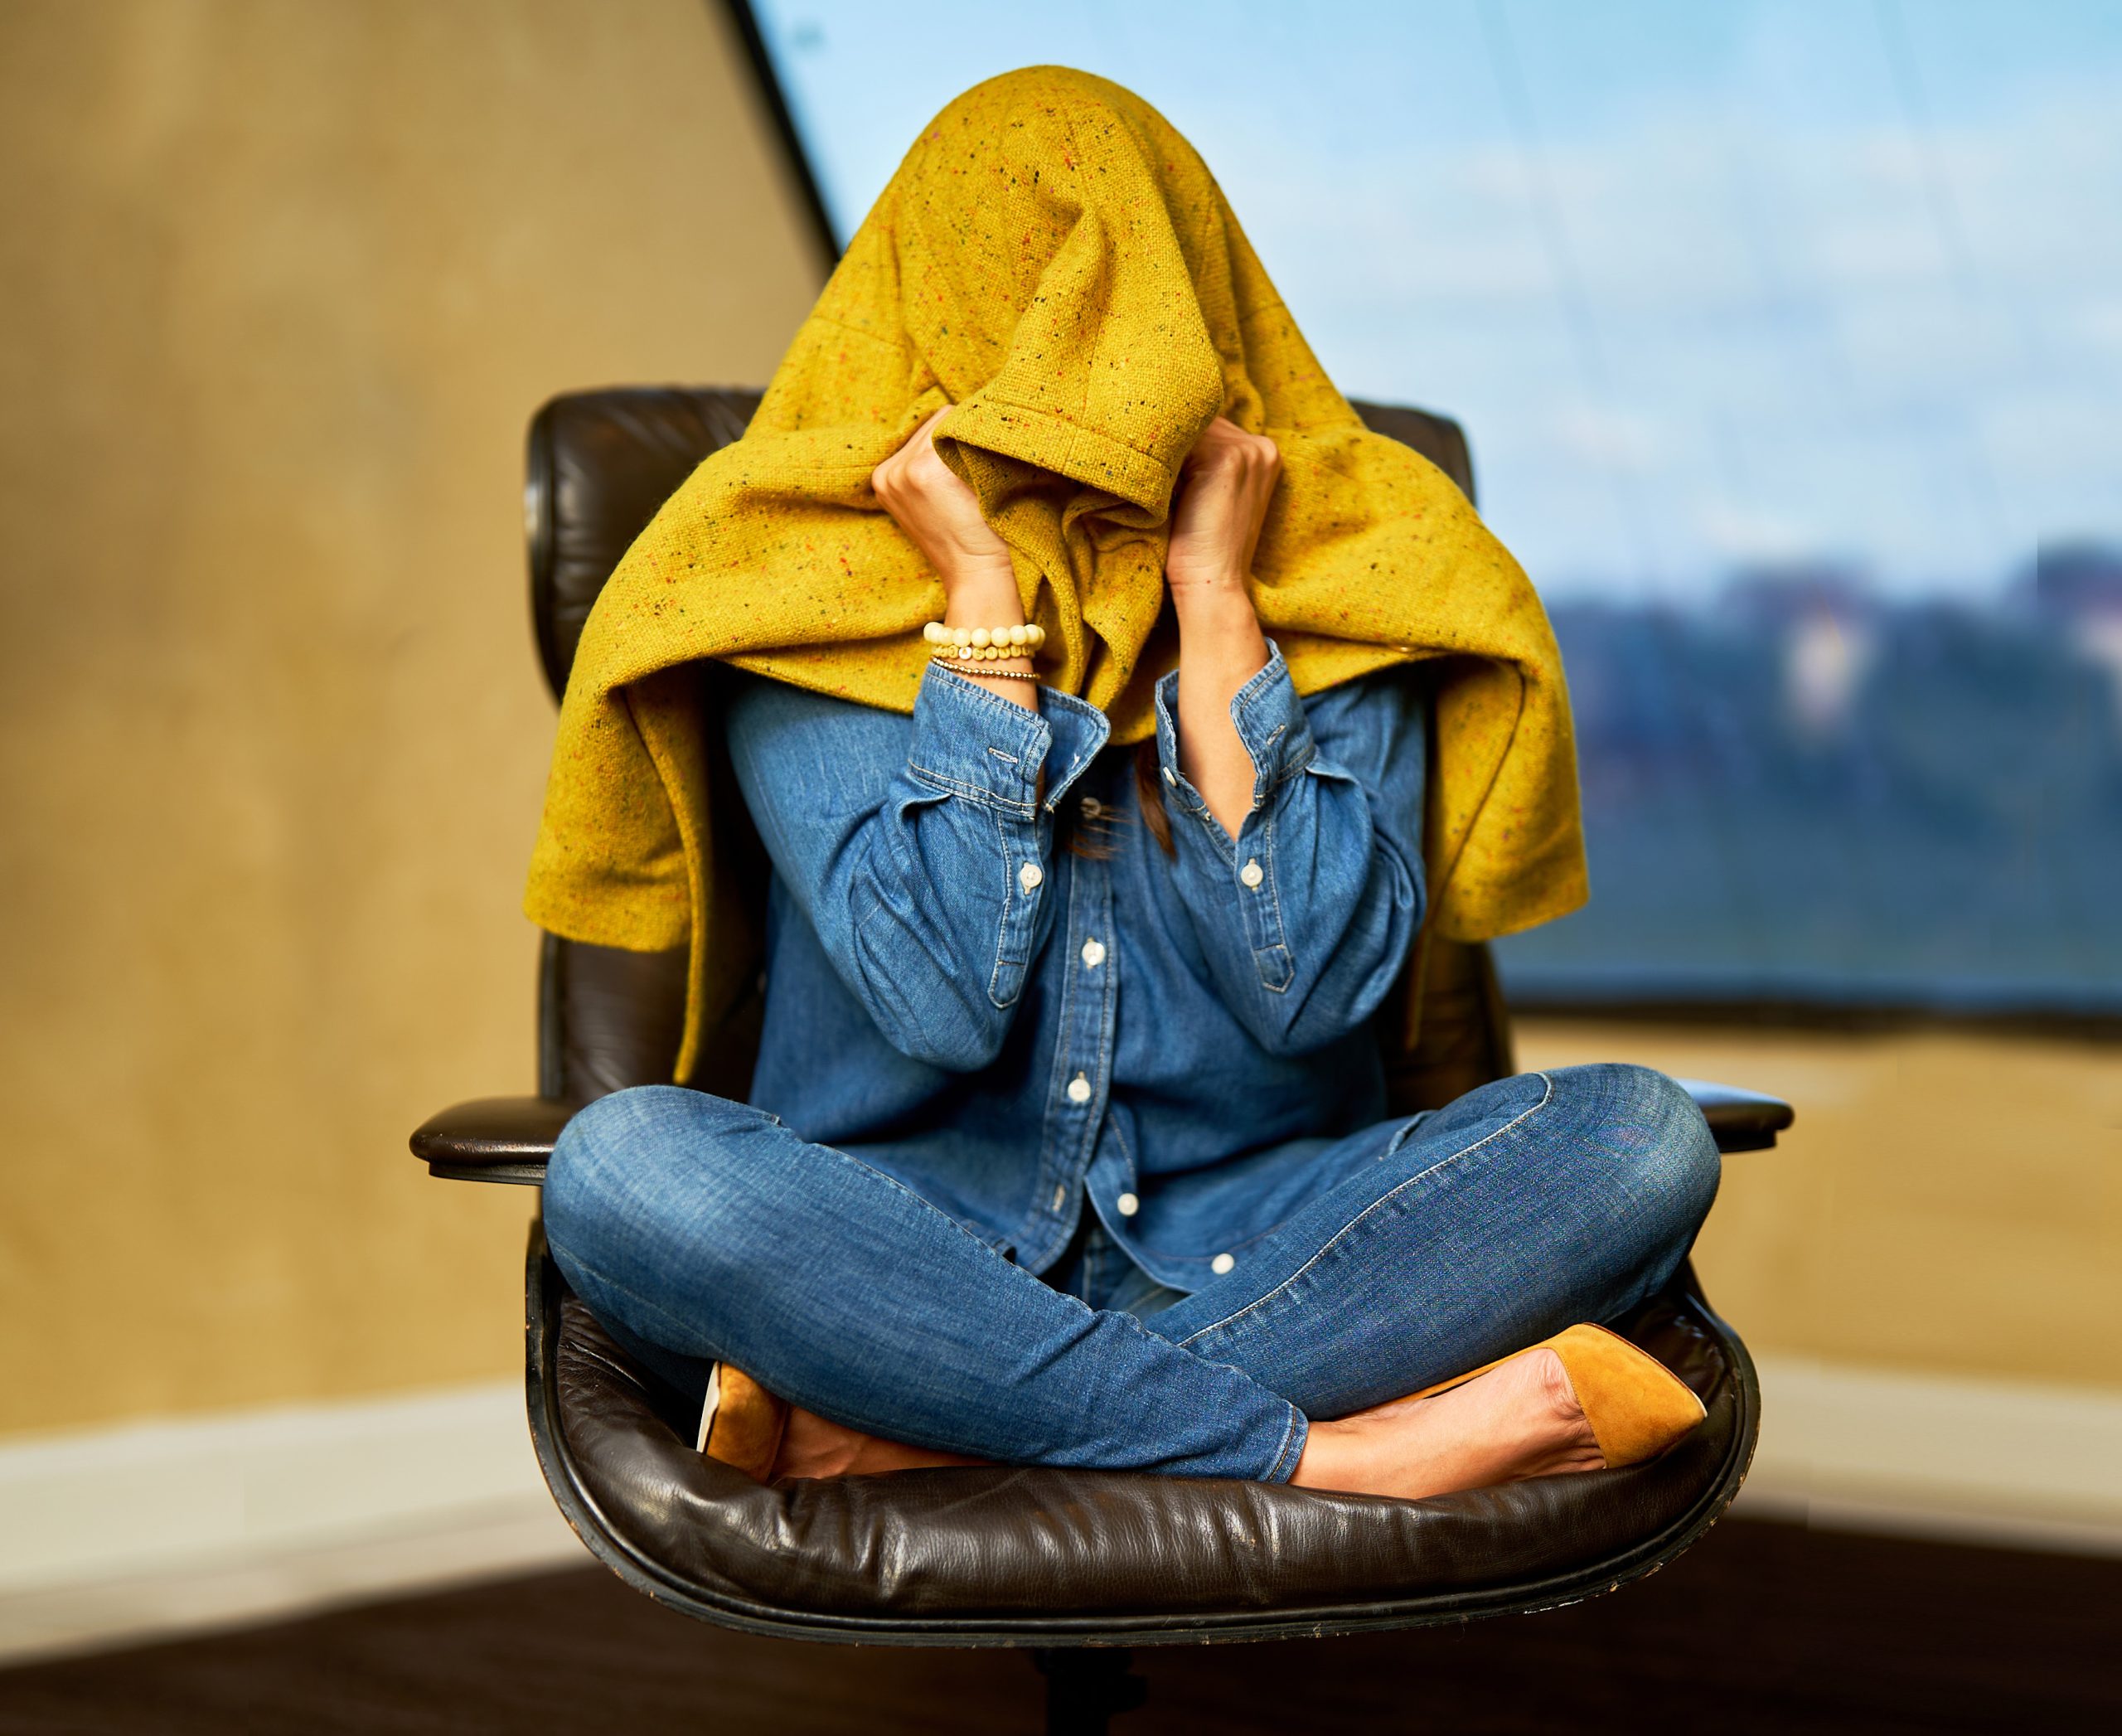 Woman sitting in chair with coat over head.